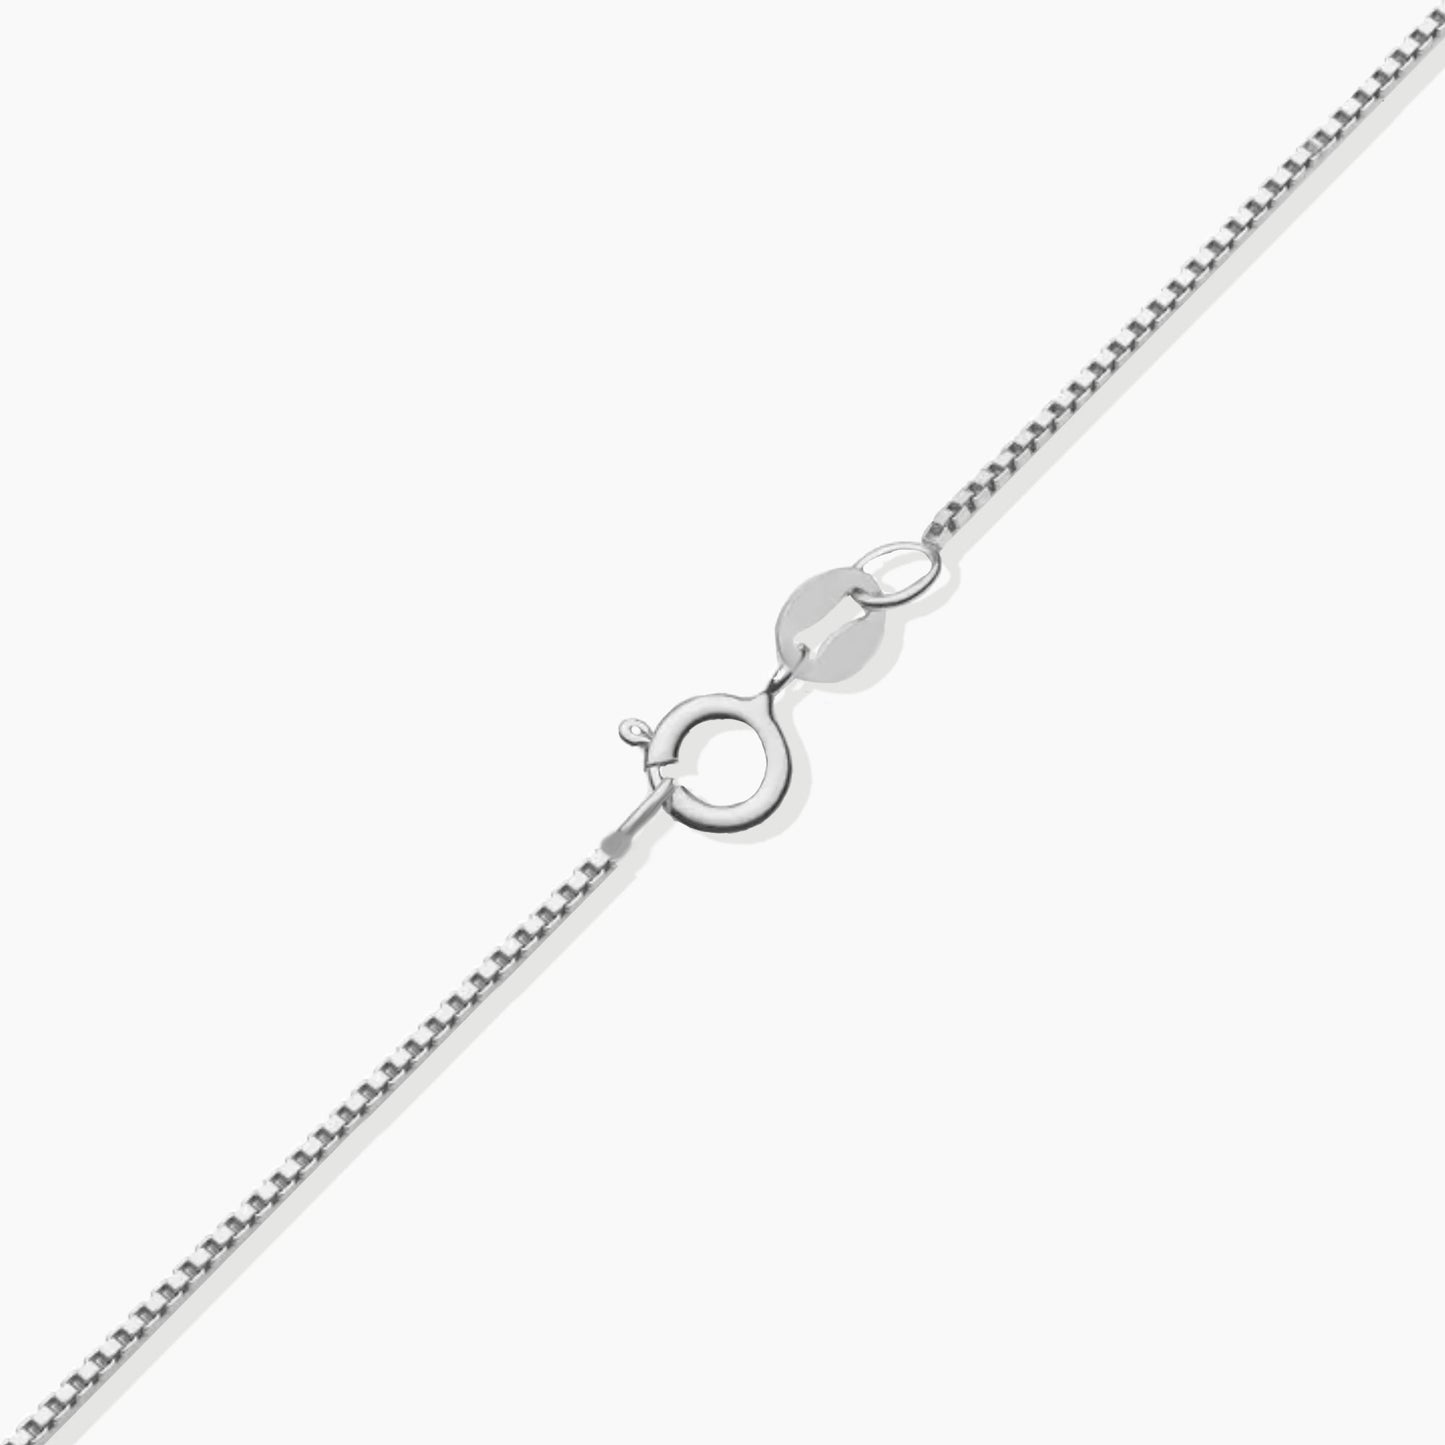 Irosk Oval Cut Necklace in Sterling Silver -  Aquamarine